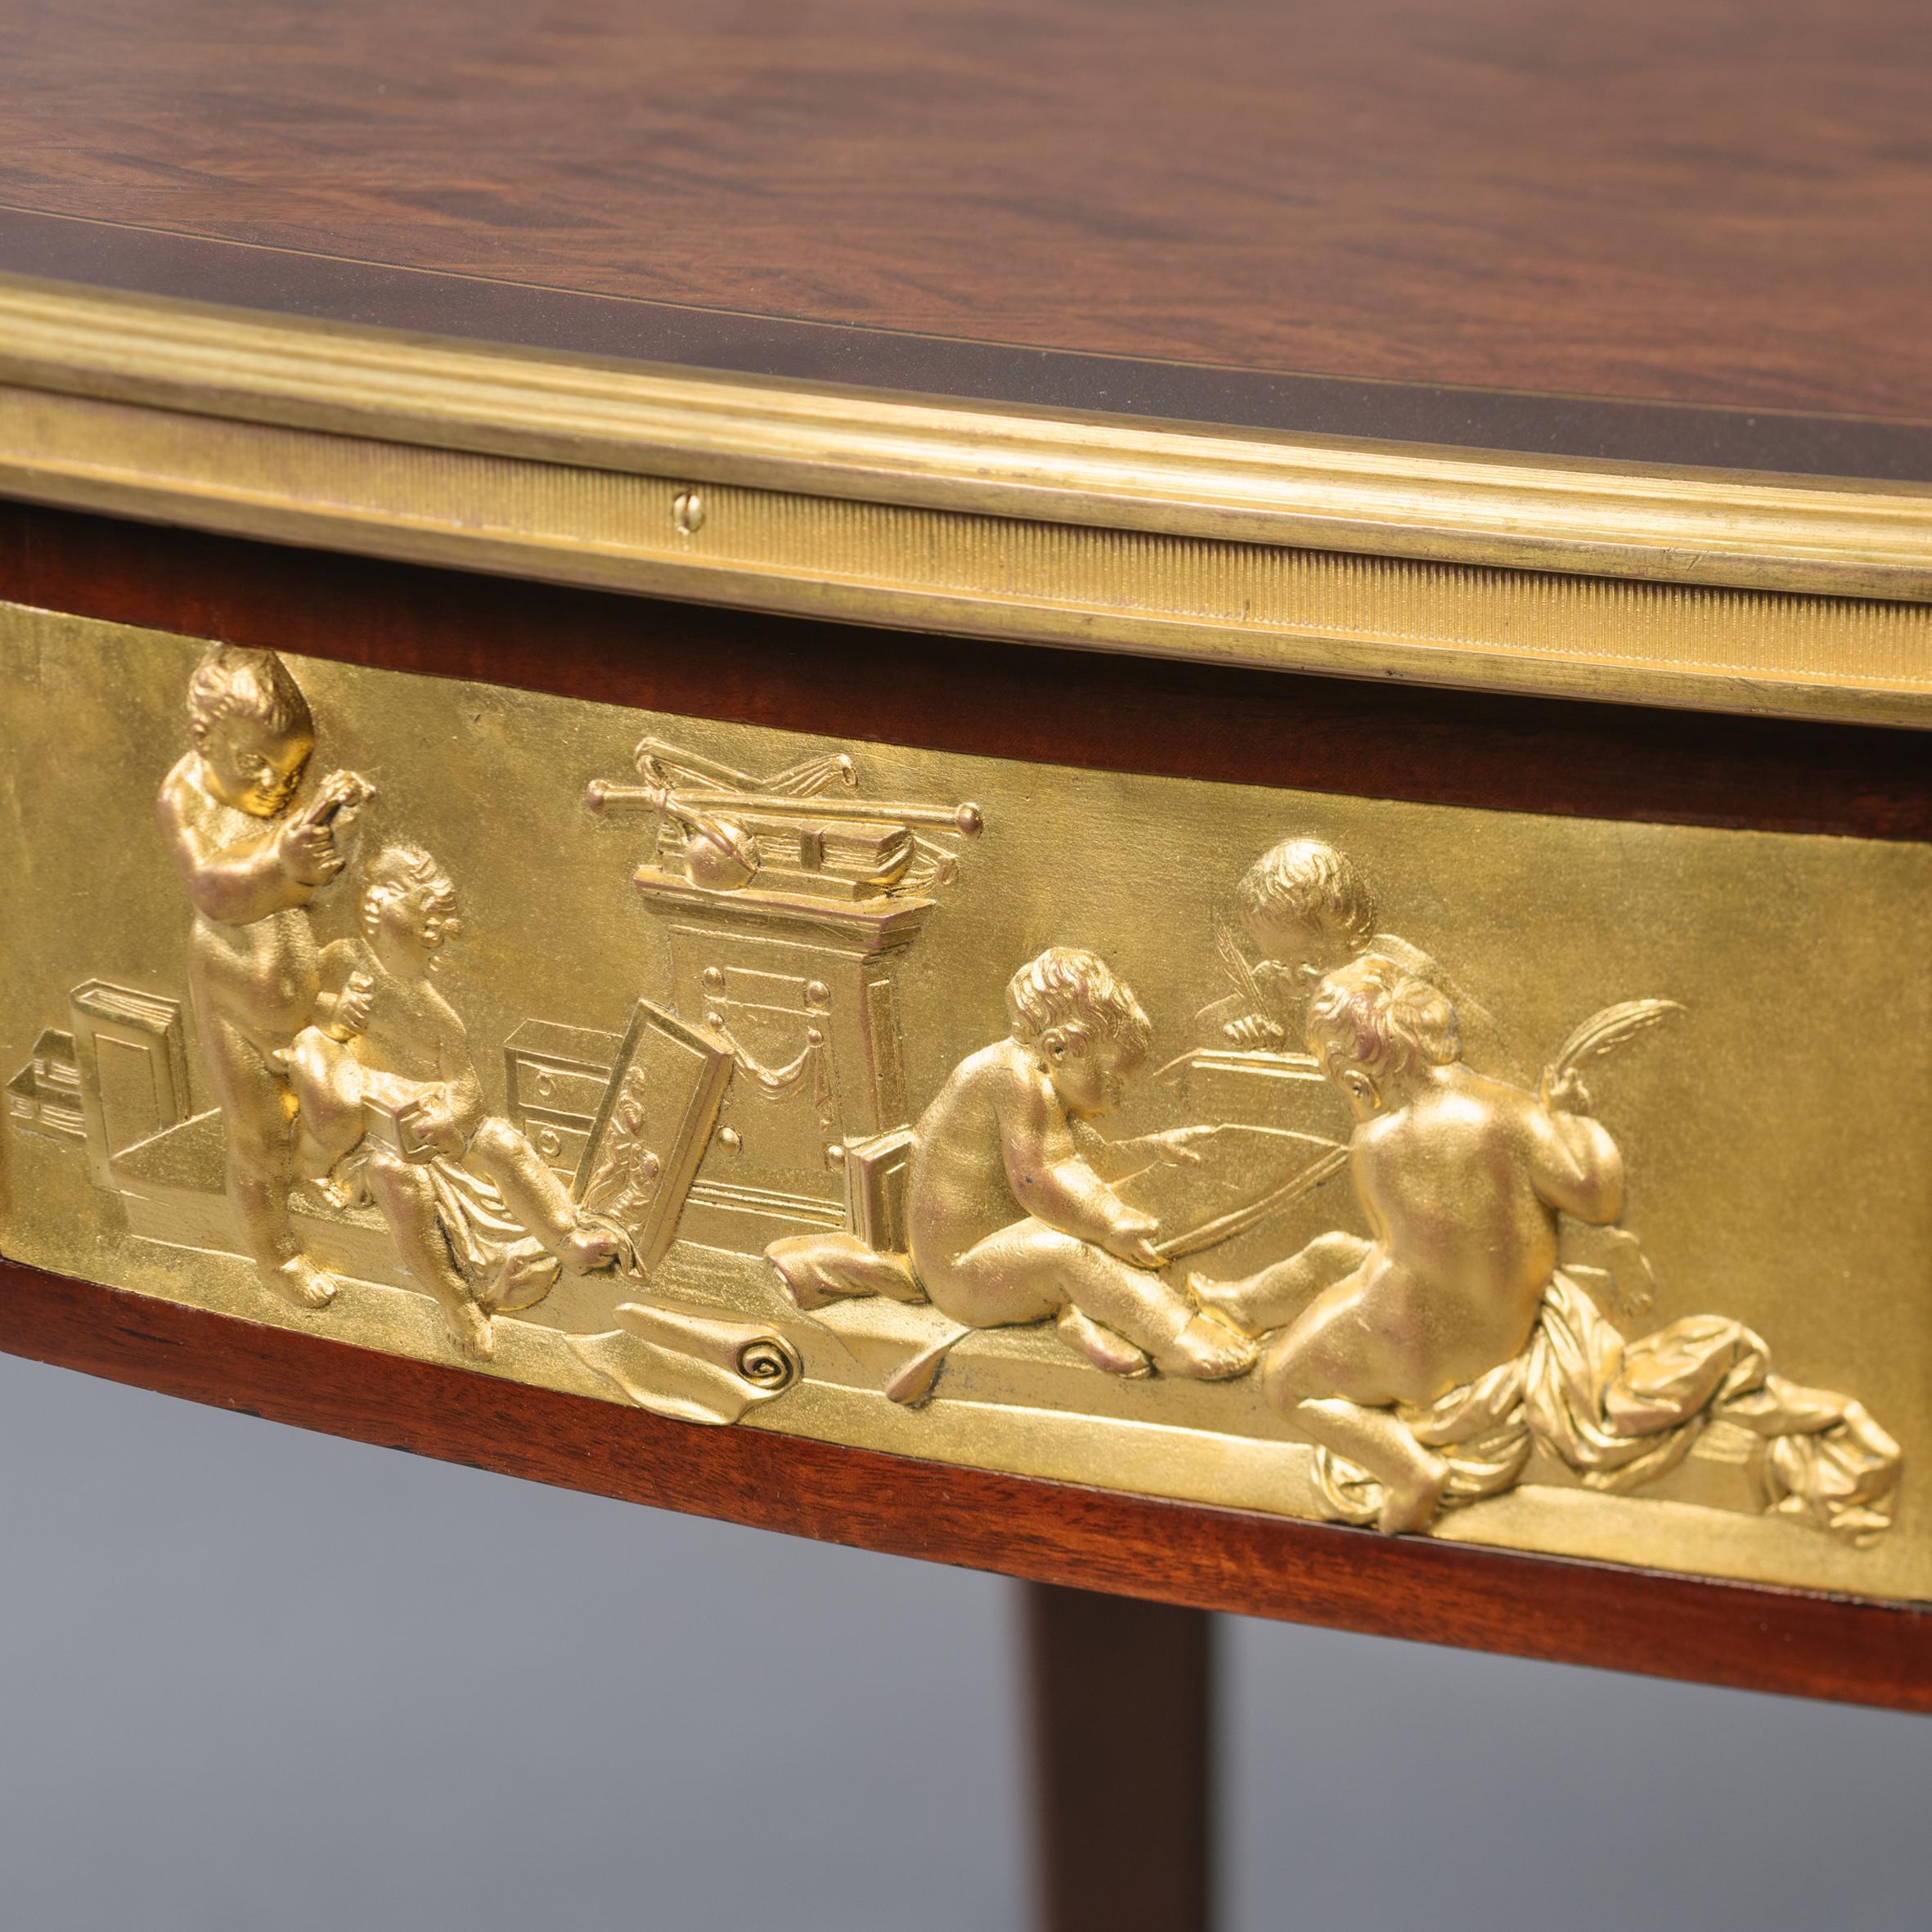 A fine Louis XVI style gilt-bronze mounted and parquetry inlaid centre table, by François Linke.

Signed 'F. Linke' to the bronze rim.
Stamped 'FL' to the reverse of the bronze mounts.

This fine oval centre table has a parquetry inlaid top